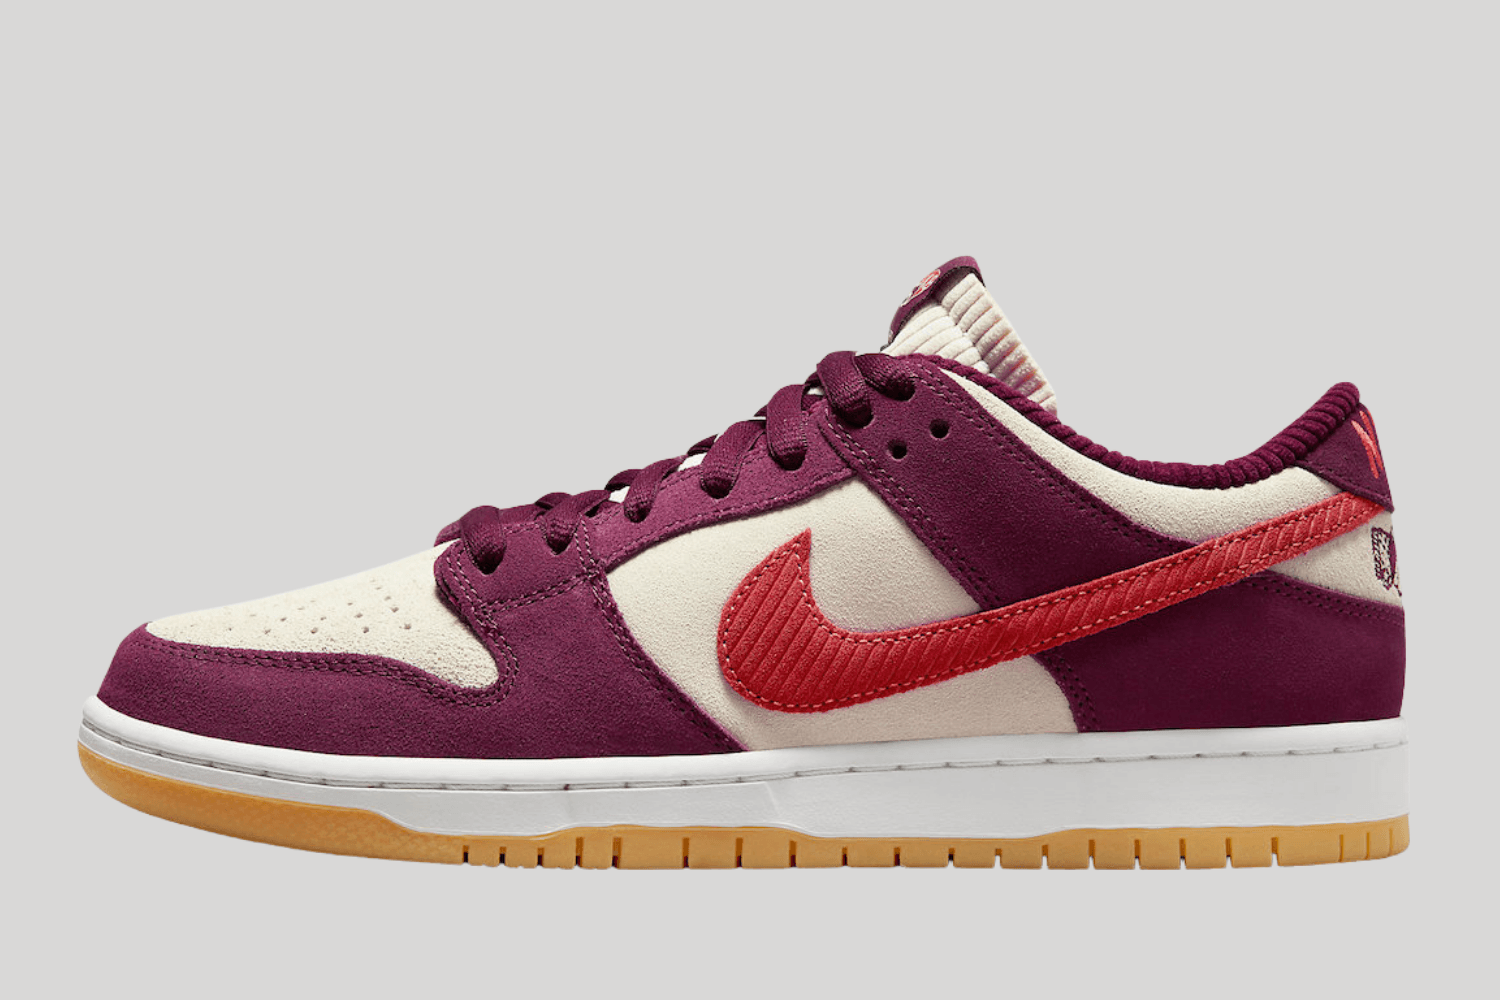 The Skate Like A Girl x Nike SB Dunk Low is releasing in 2022